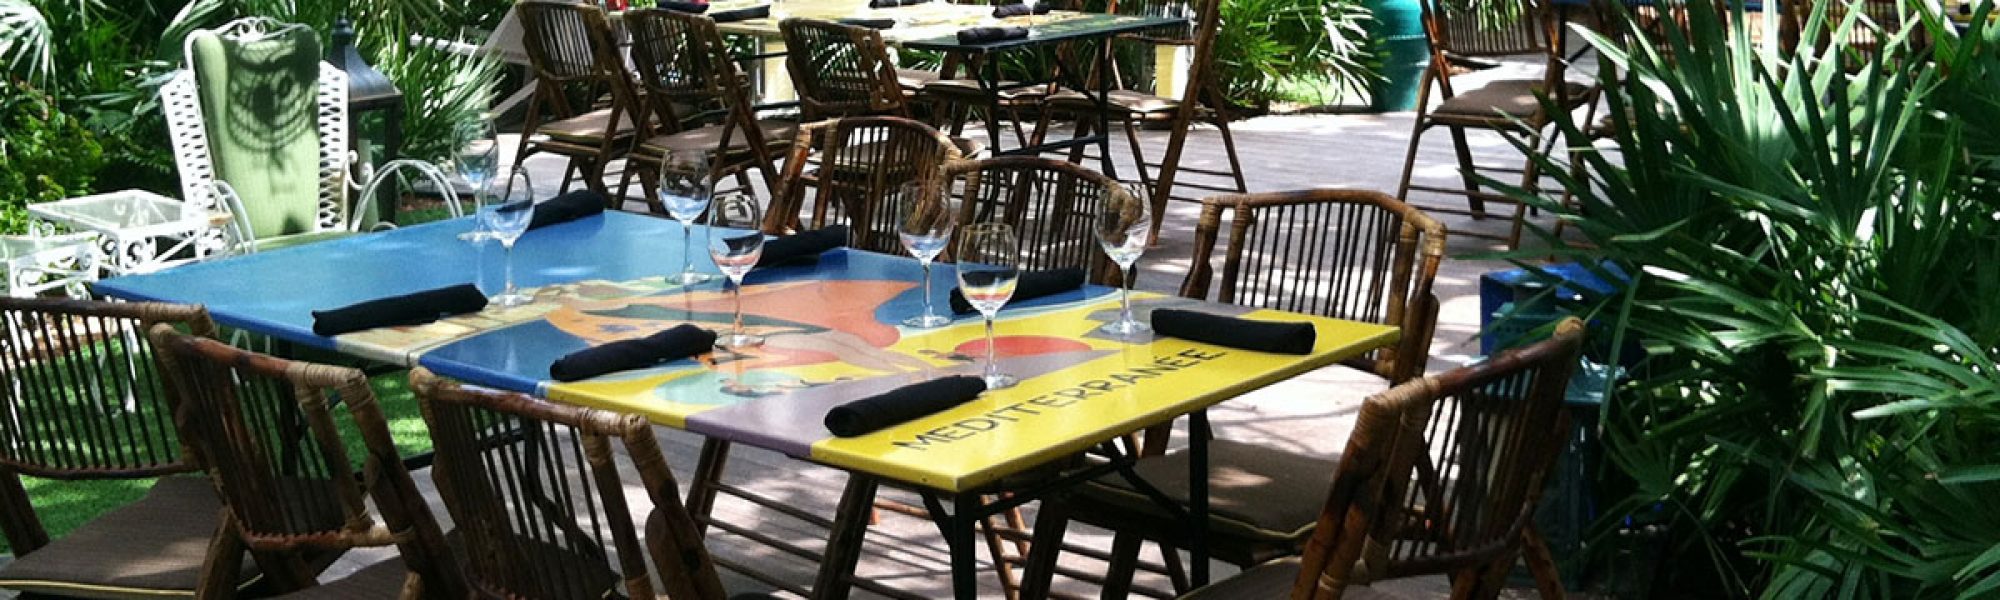 W South Beach hand painted tables by Yoemir Alfonso